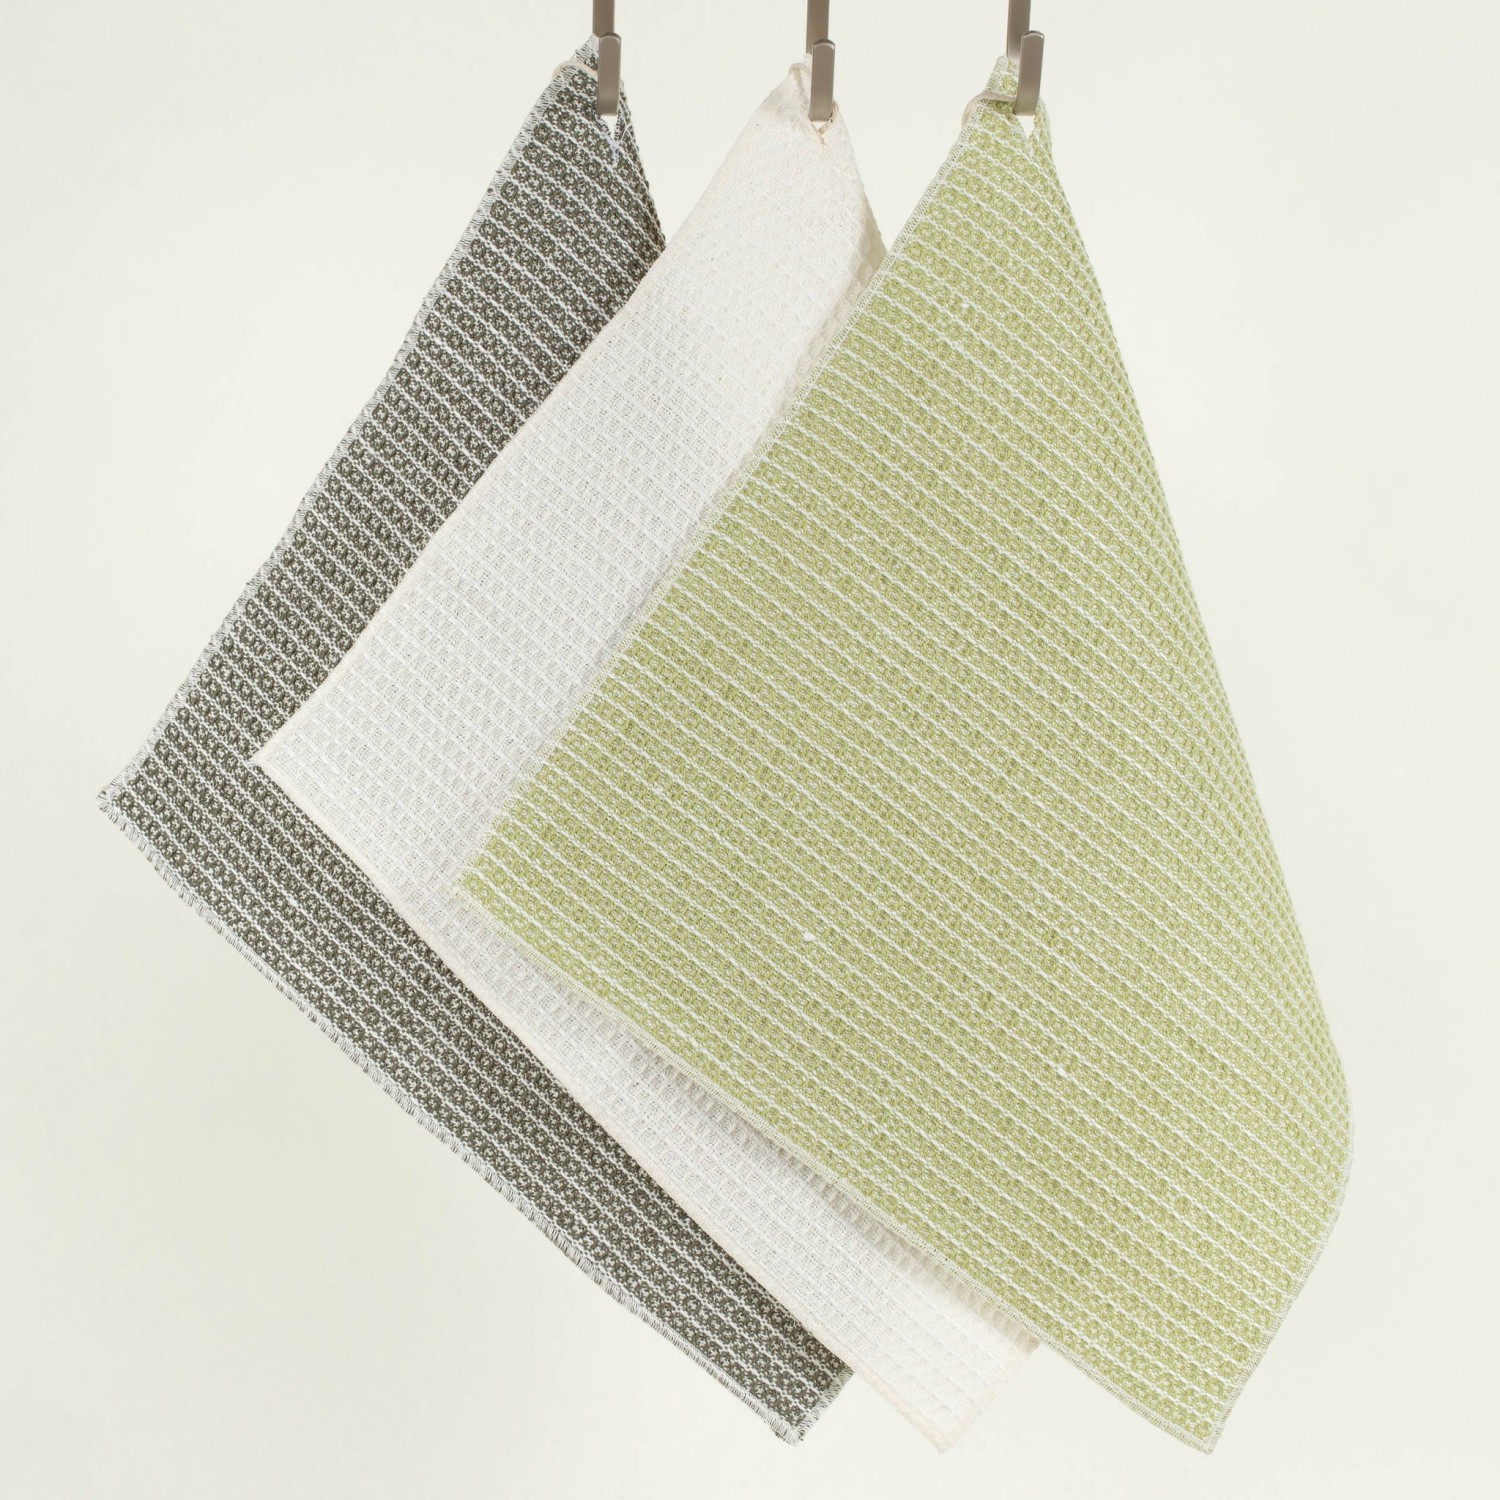 Plastic-free Cleaning Cloth Rag Bundle half-linen Waffle Pique, Set of 3 colourful mixed No. 20